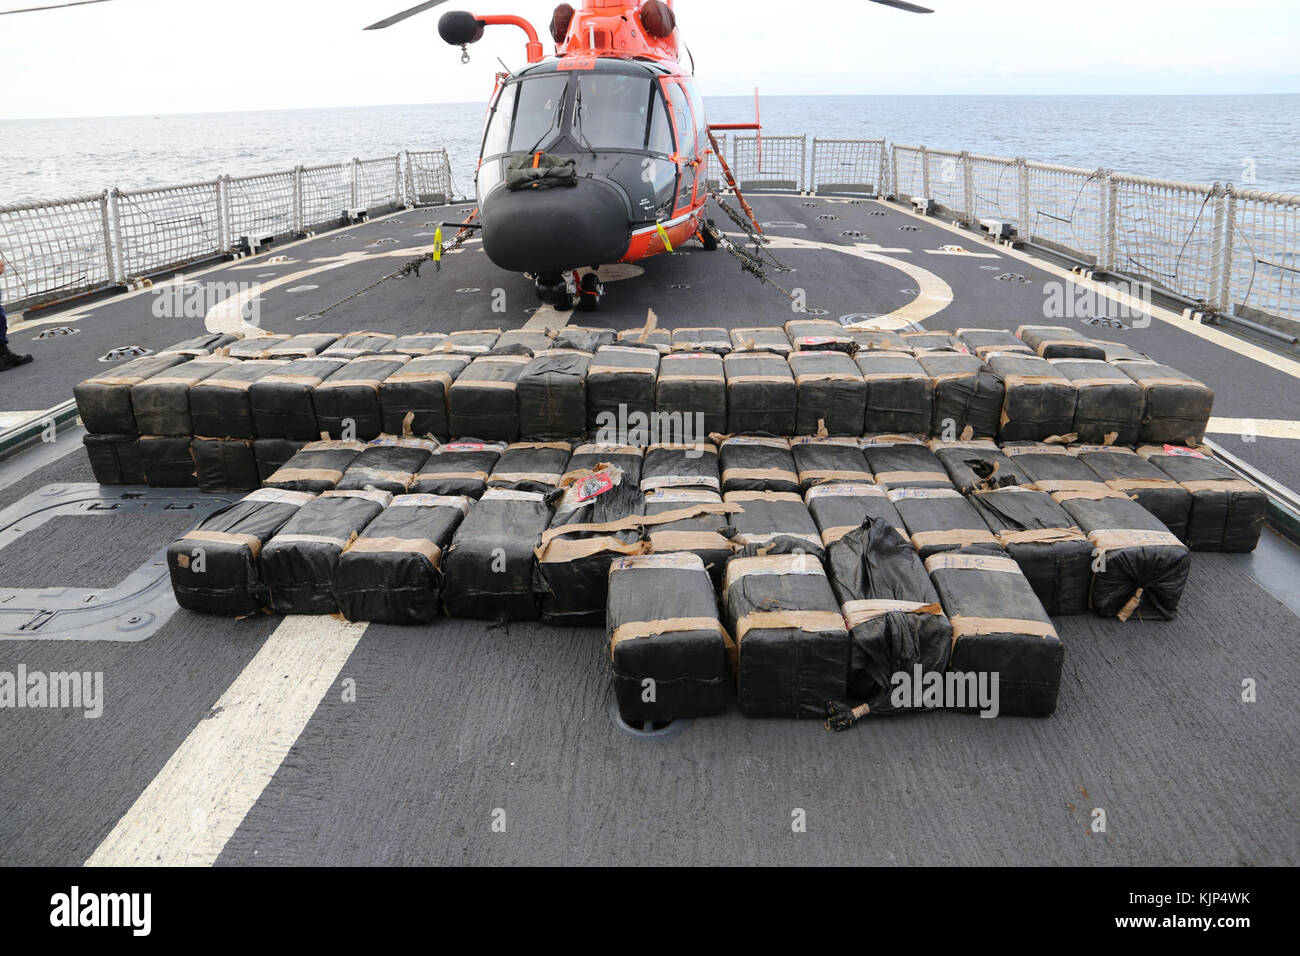 Over 2200 kilograms of seized contraband lie on Coast Guard Cutter Spencer’s flight deck with an MH-65 Dolphin Helicopter from Jacksonville, FL. The fight against transnational organized crime networks in the Eastern Pacific requires unity of effort in all phases from detection, monitoring and interdiction, to prosecution. Coast Guard photo by Petty Officer Second Class Timothy Midas. Stock Photo